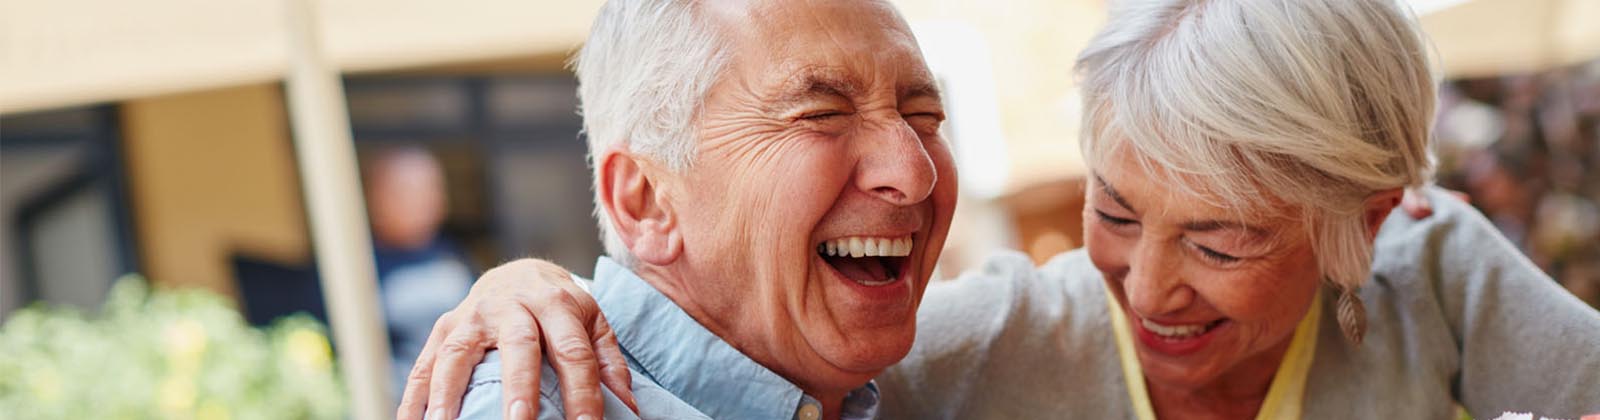 senior couple embracing while laughing outside